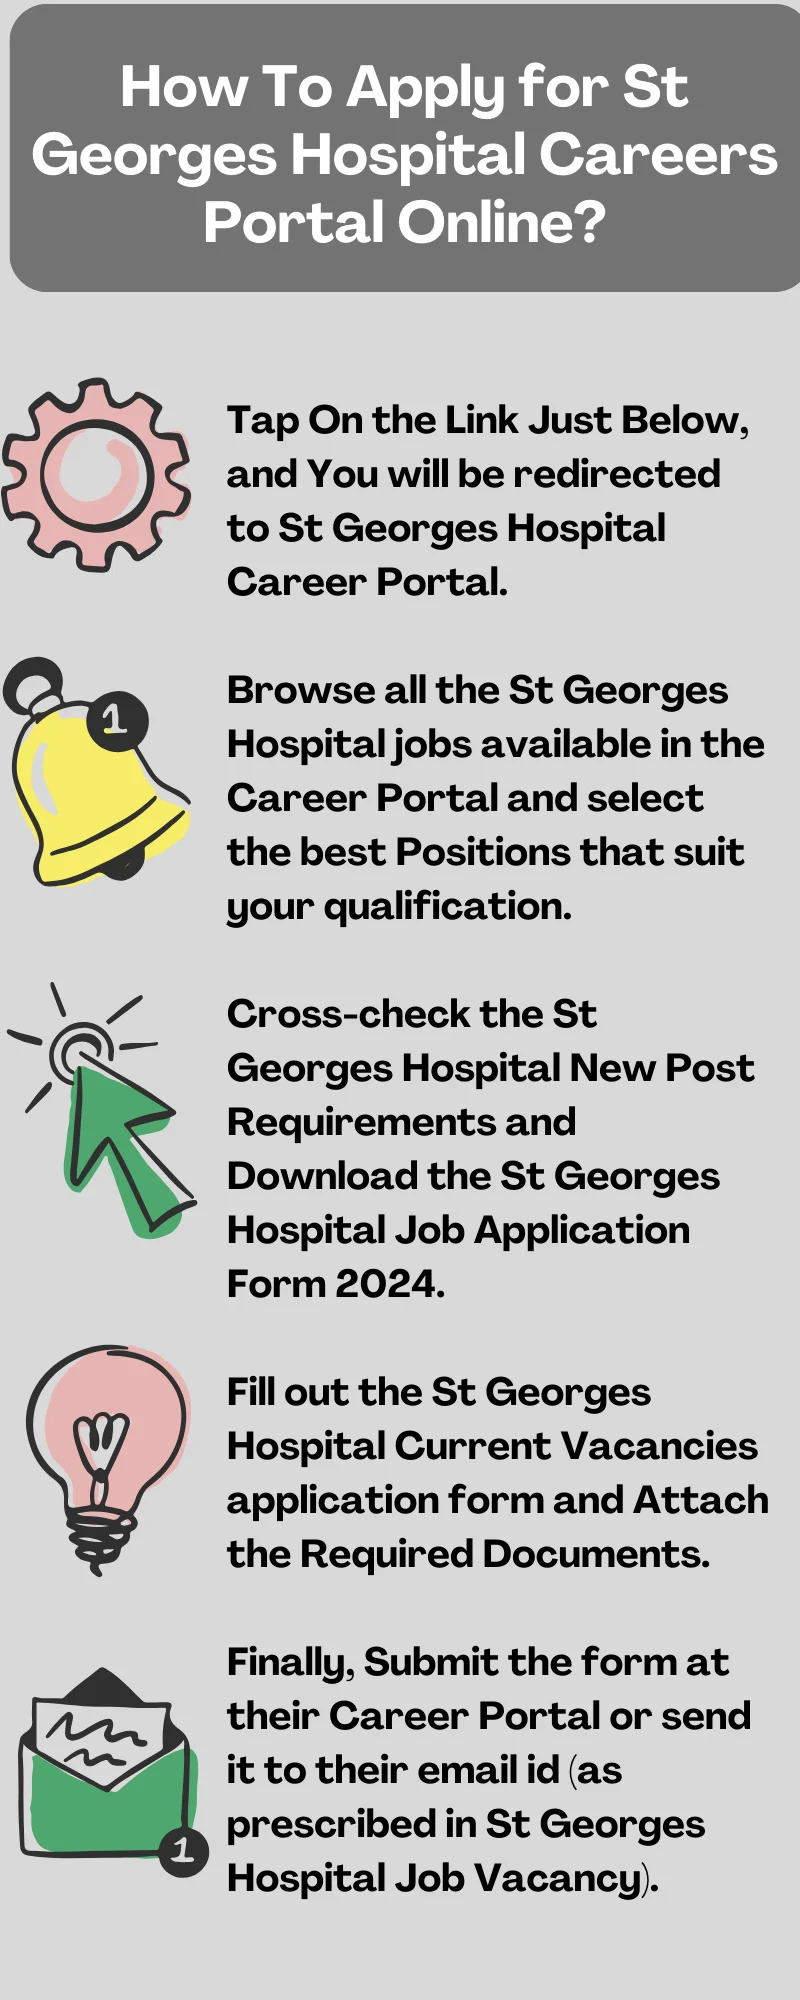 How To Apply for St Georges Hospital Careers Portal Online?